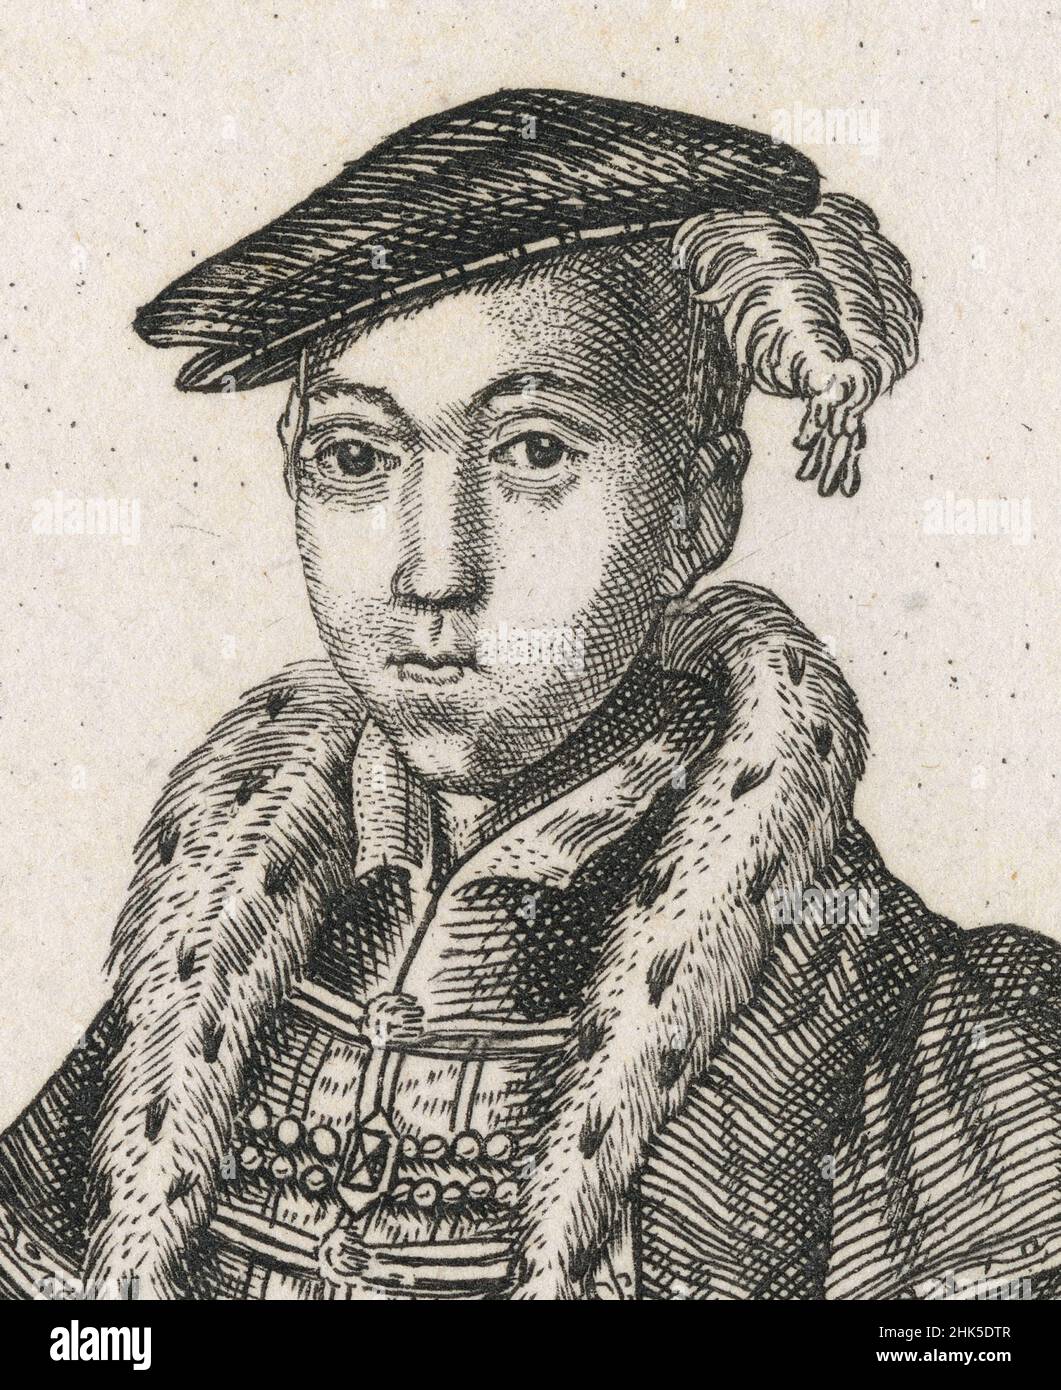 Antique early 19th century etching after Robert Peake (c.1607-1667) of Edward VI. Edward VI (1537-1553) was King of England and Ireland from 28 January 1547 until his death in 1553. SOURCE: ORIGINAL ENGRAVING Stock Photo